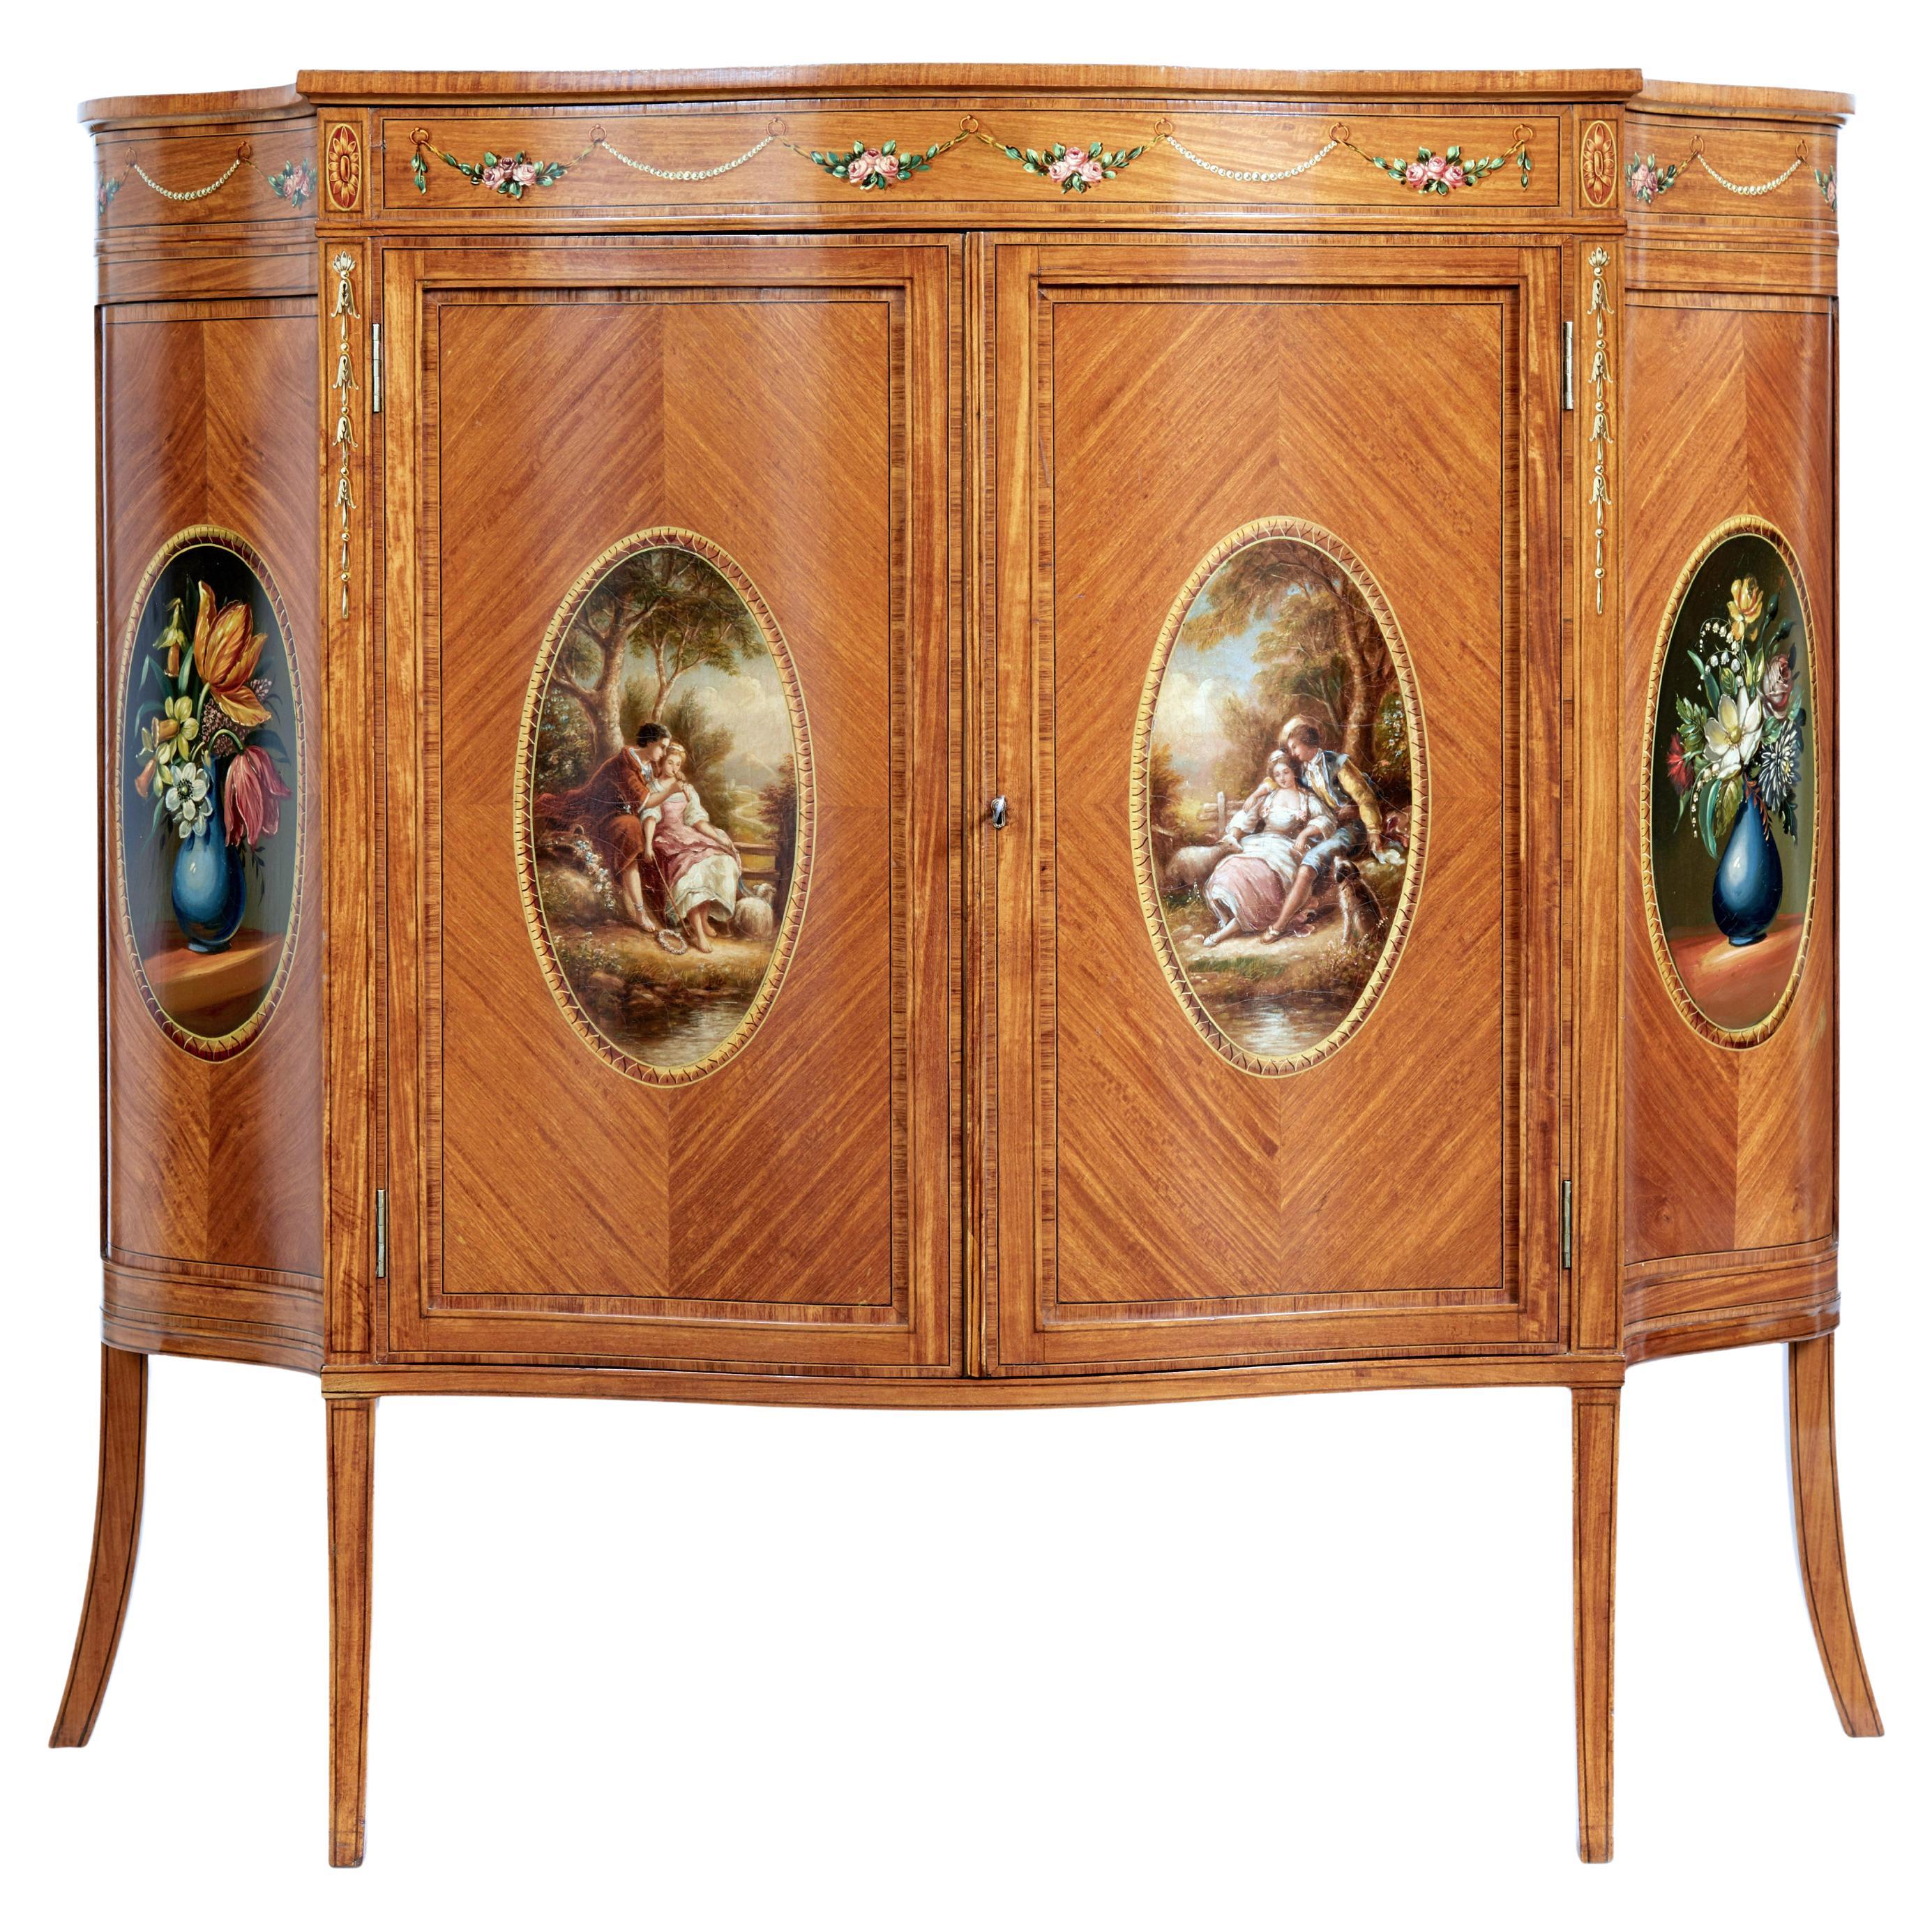 19th century sheraton revival satinwood inlaid and painted cabinet For Sale